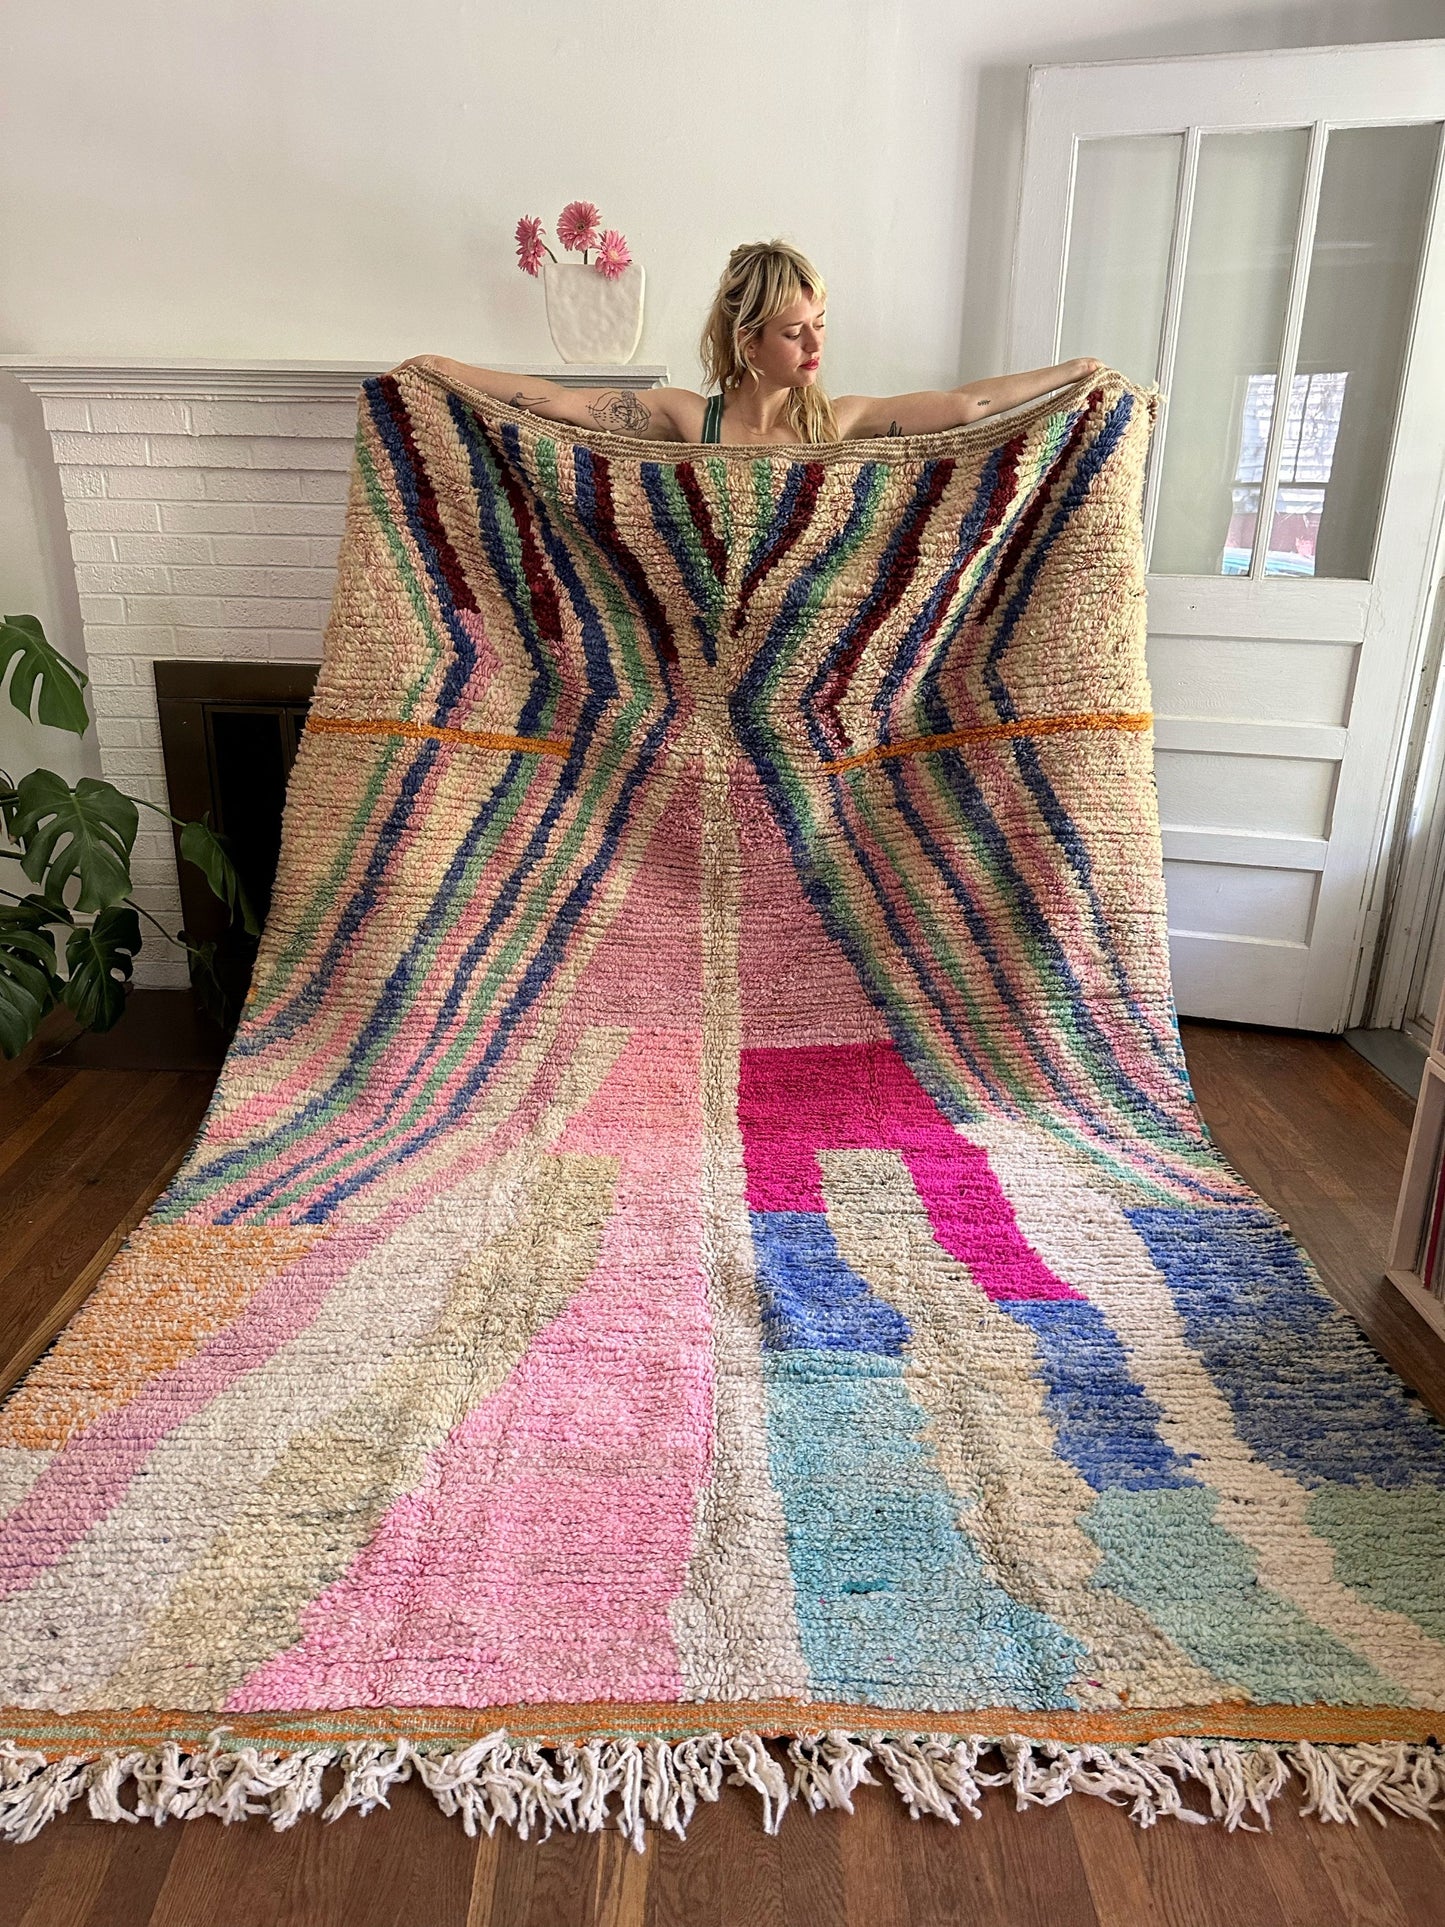 Flora Moroccan Rug is held to see how bright and fluffy it is